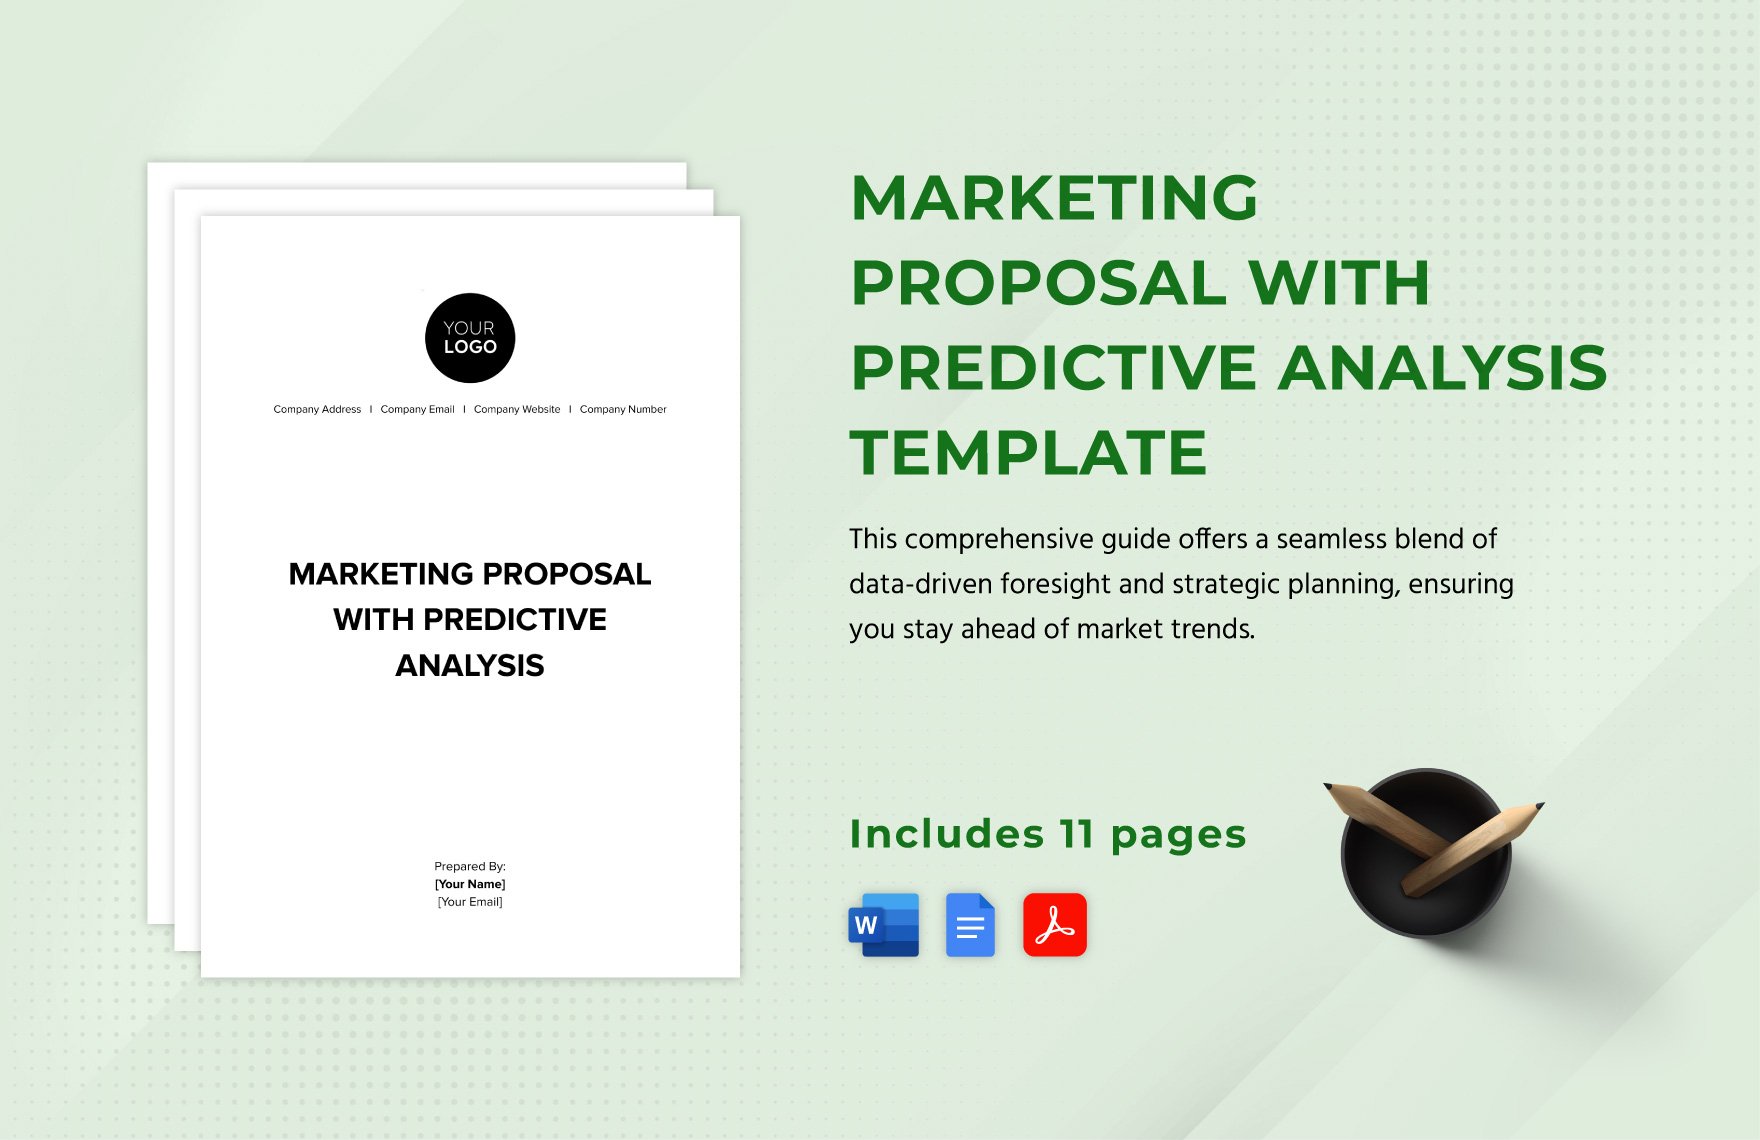 Marketing Proposal with Predictive Analysis Template